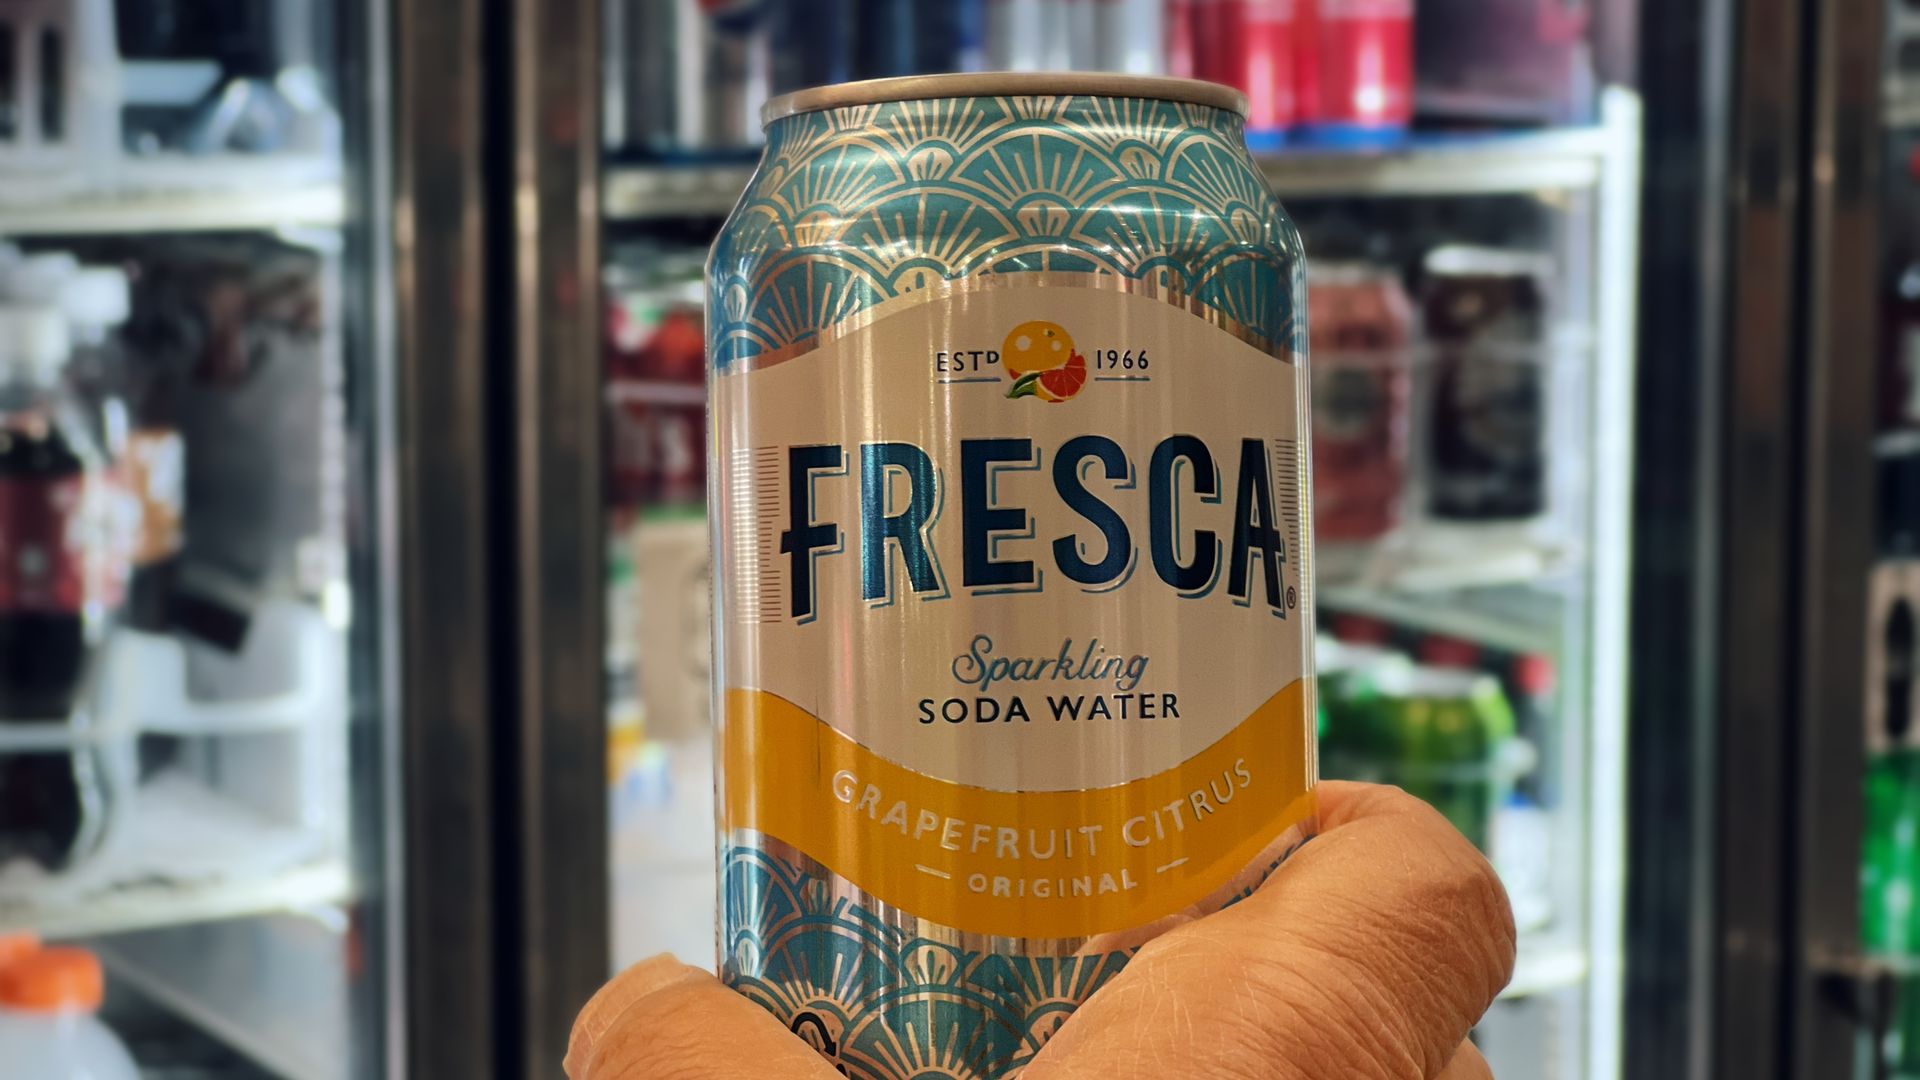 A can of Fresca.